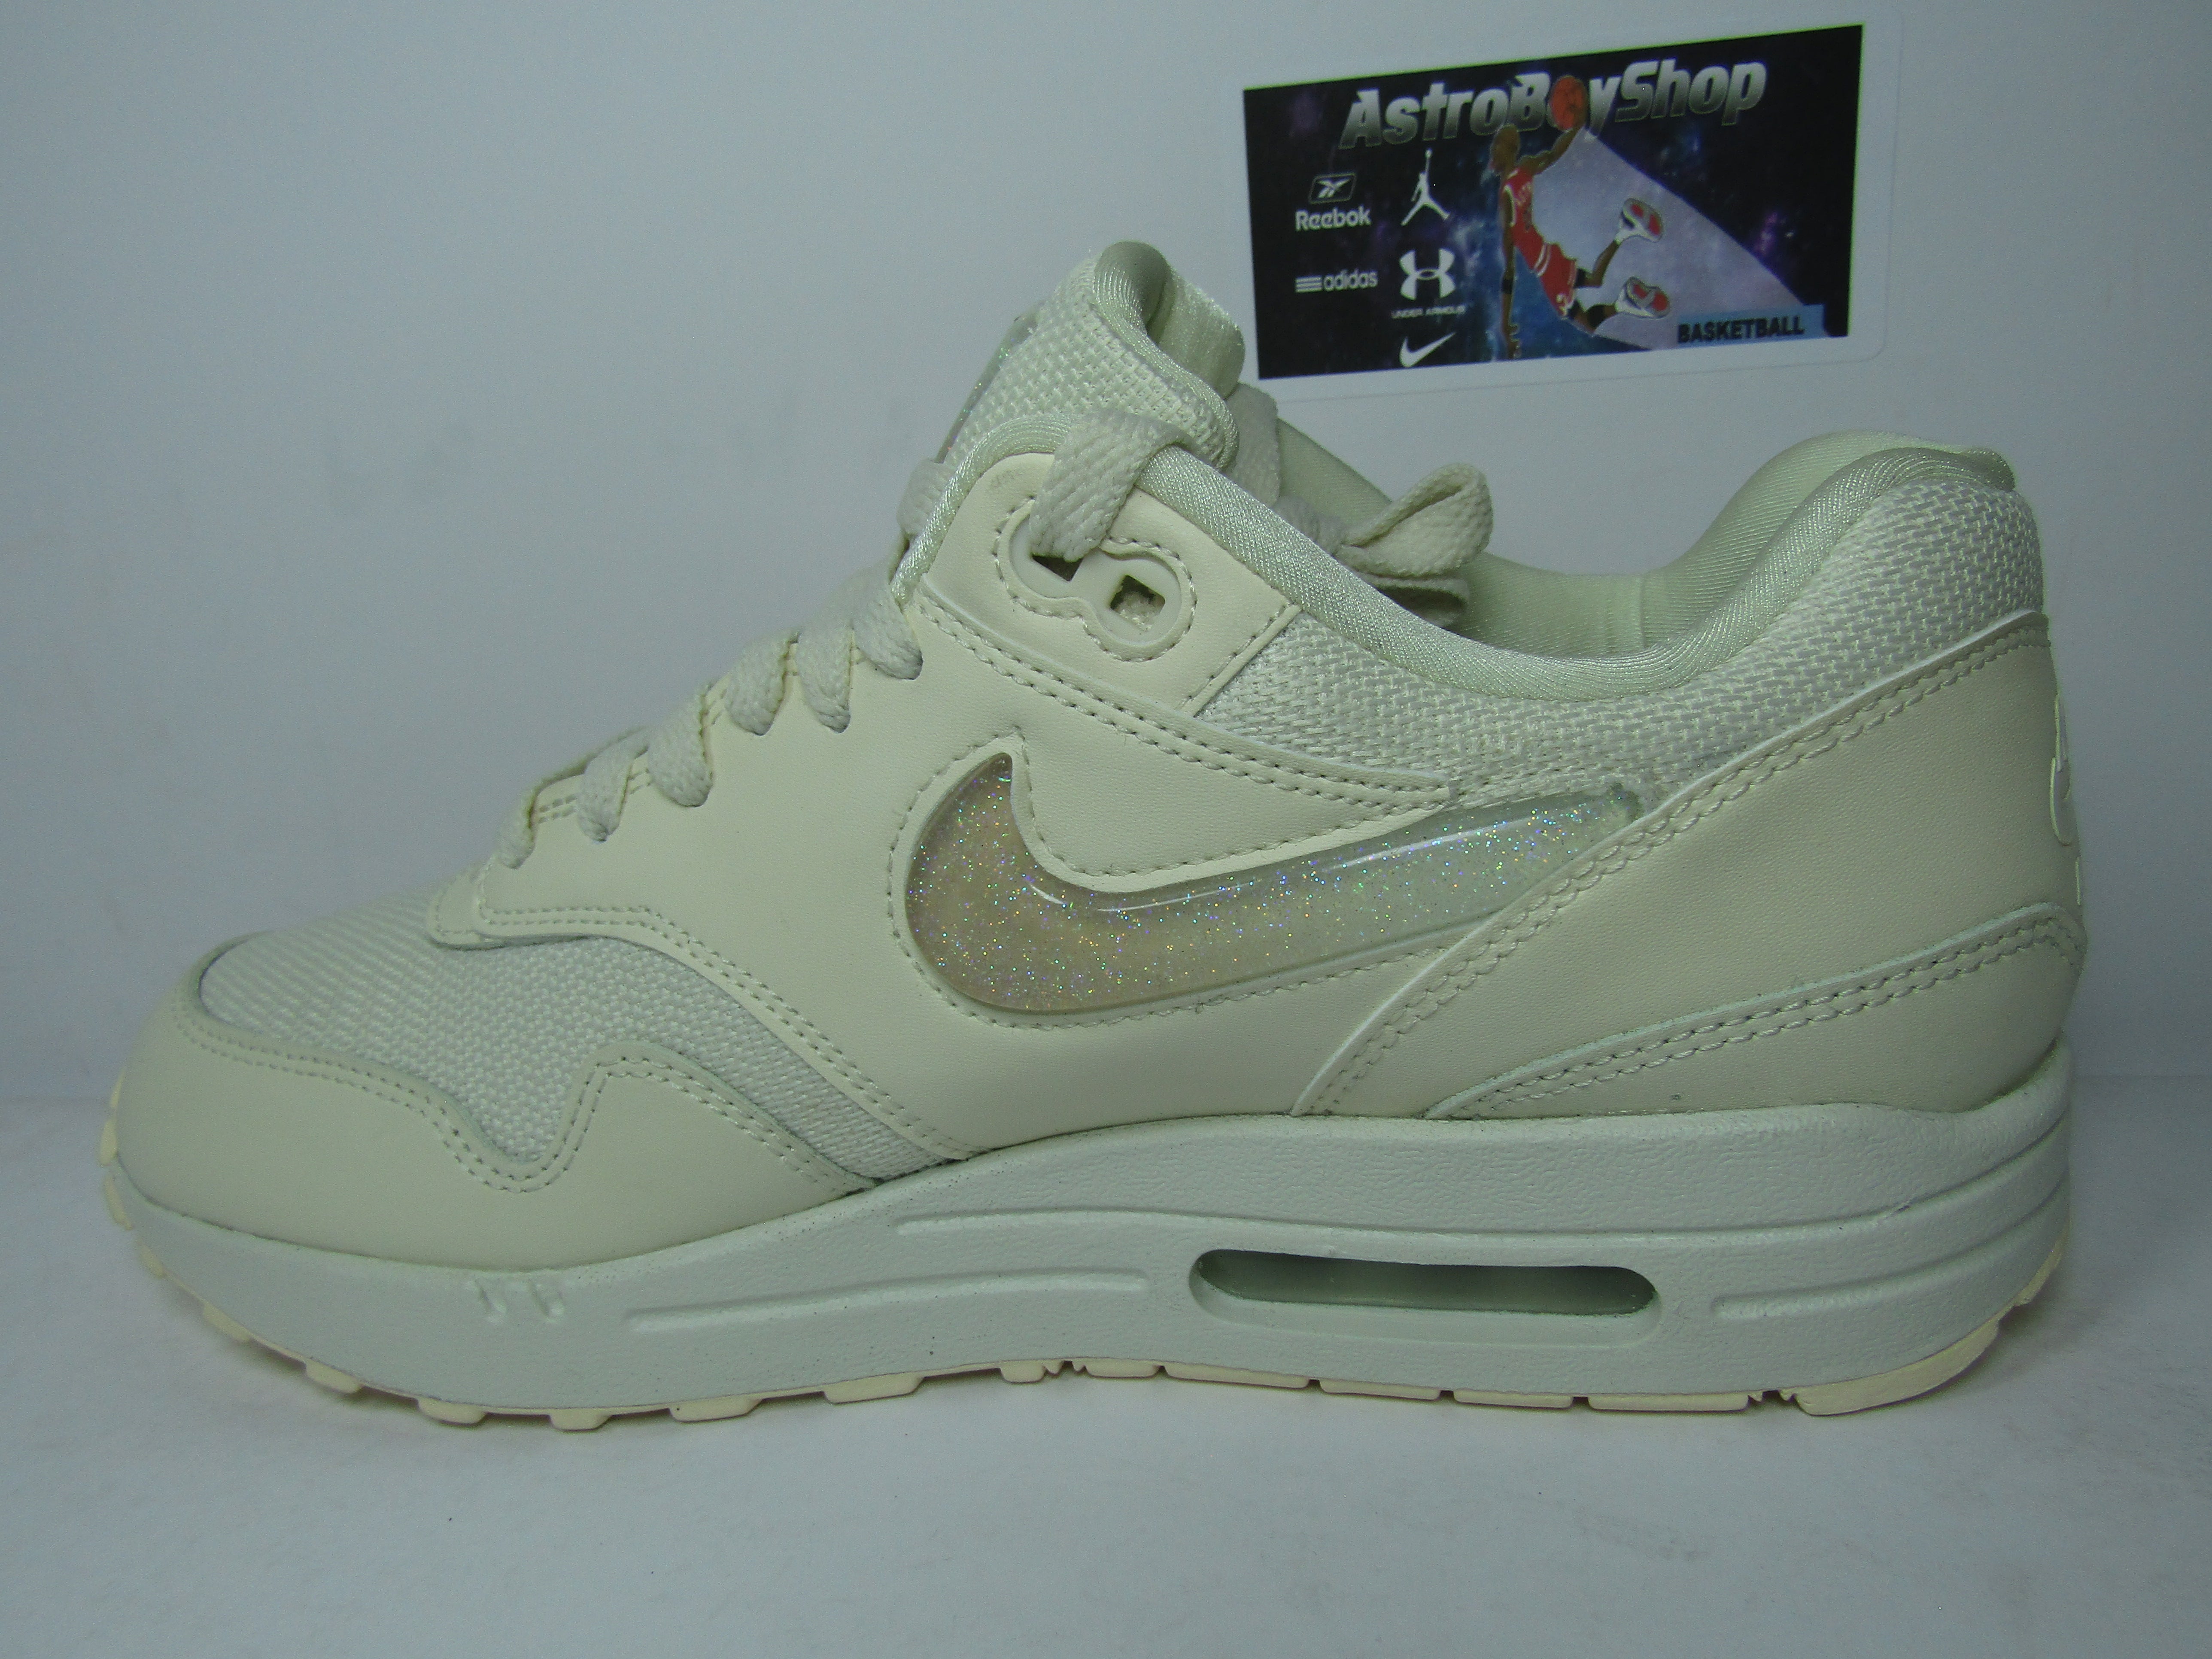 NIKE AIR MAX 1 (WOMENS) JELLY PUFF EDITION EN SNEAKER STORE